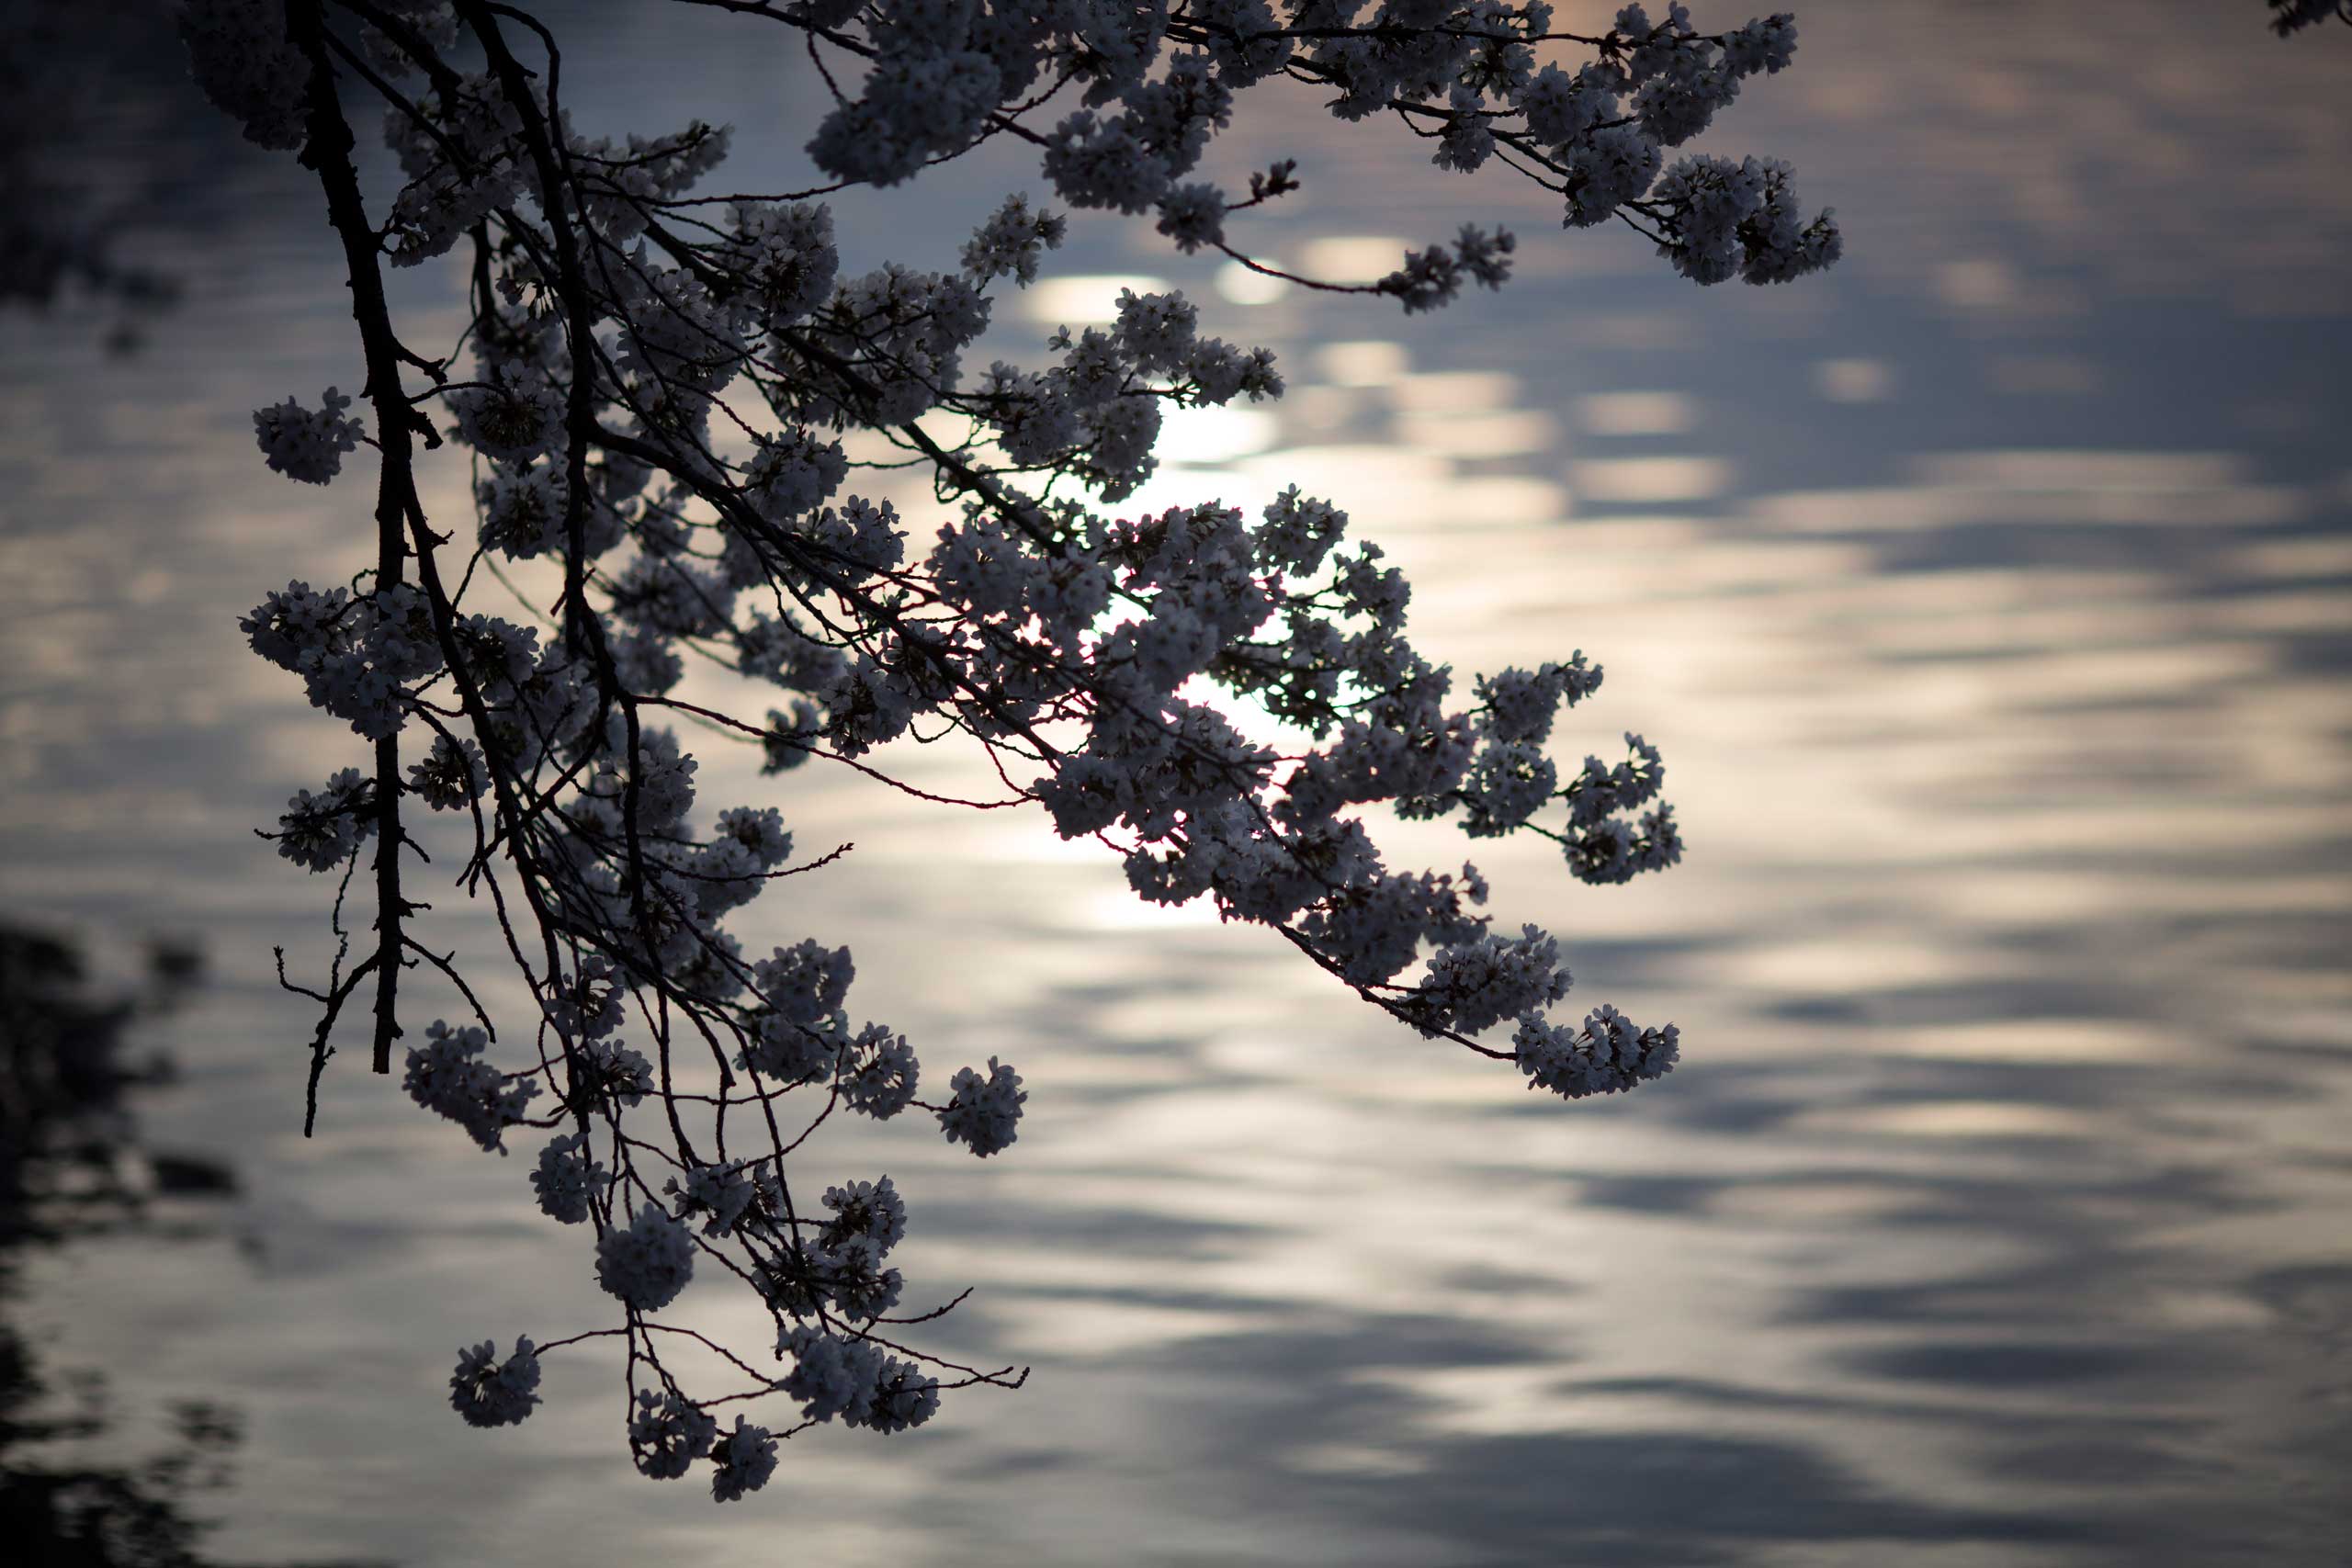 The blossoms of cherry trees hang over the Tidal Basin at sunrise in Washington, D.C. on April 11, 2015 .